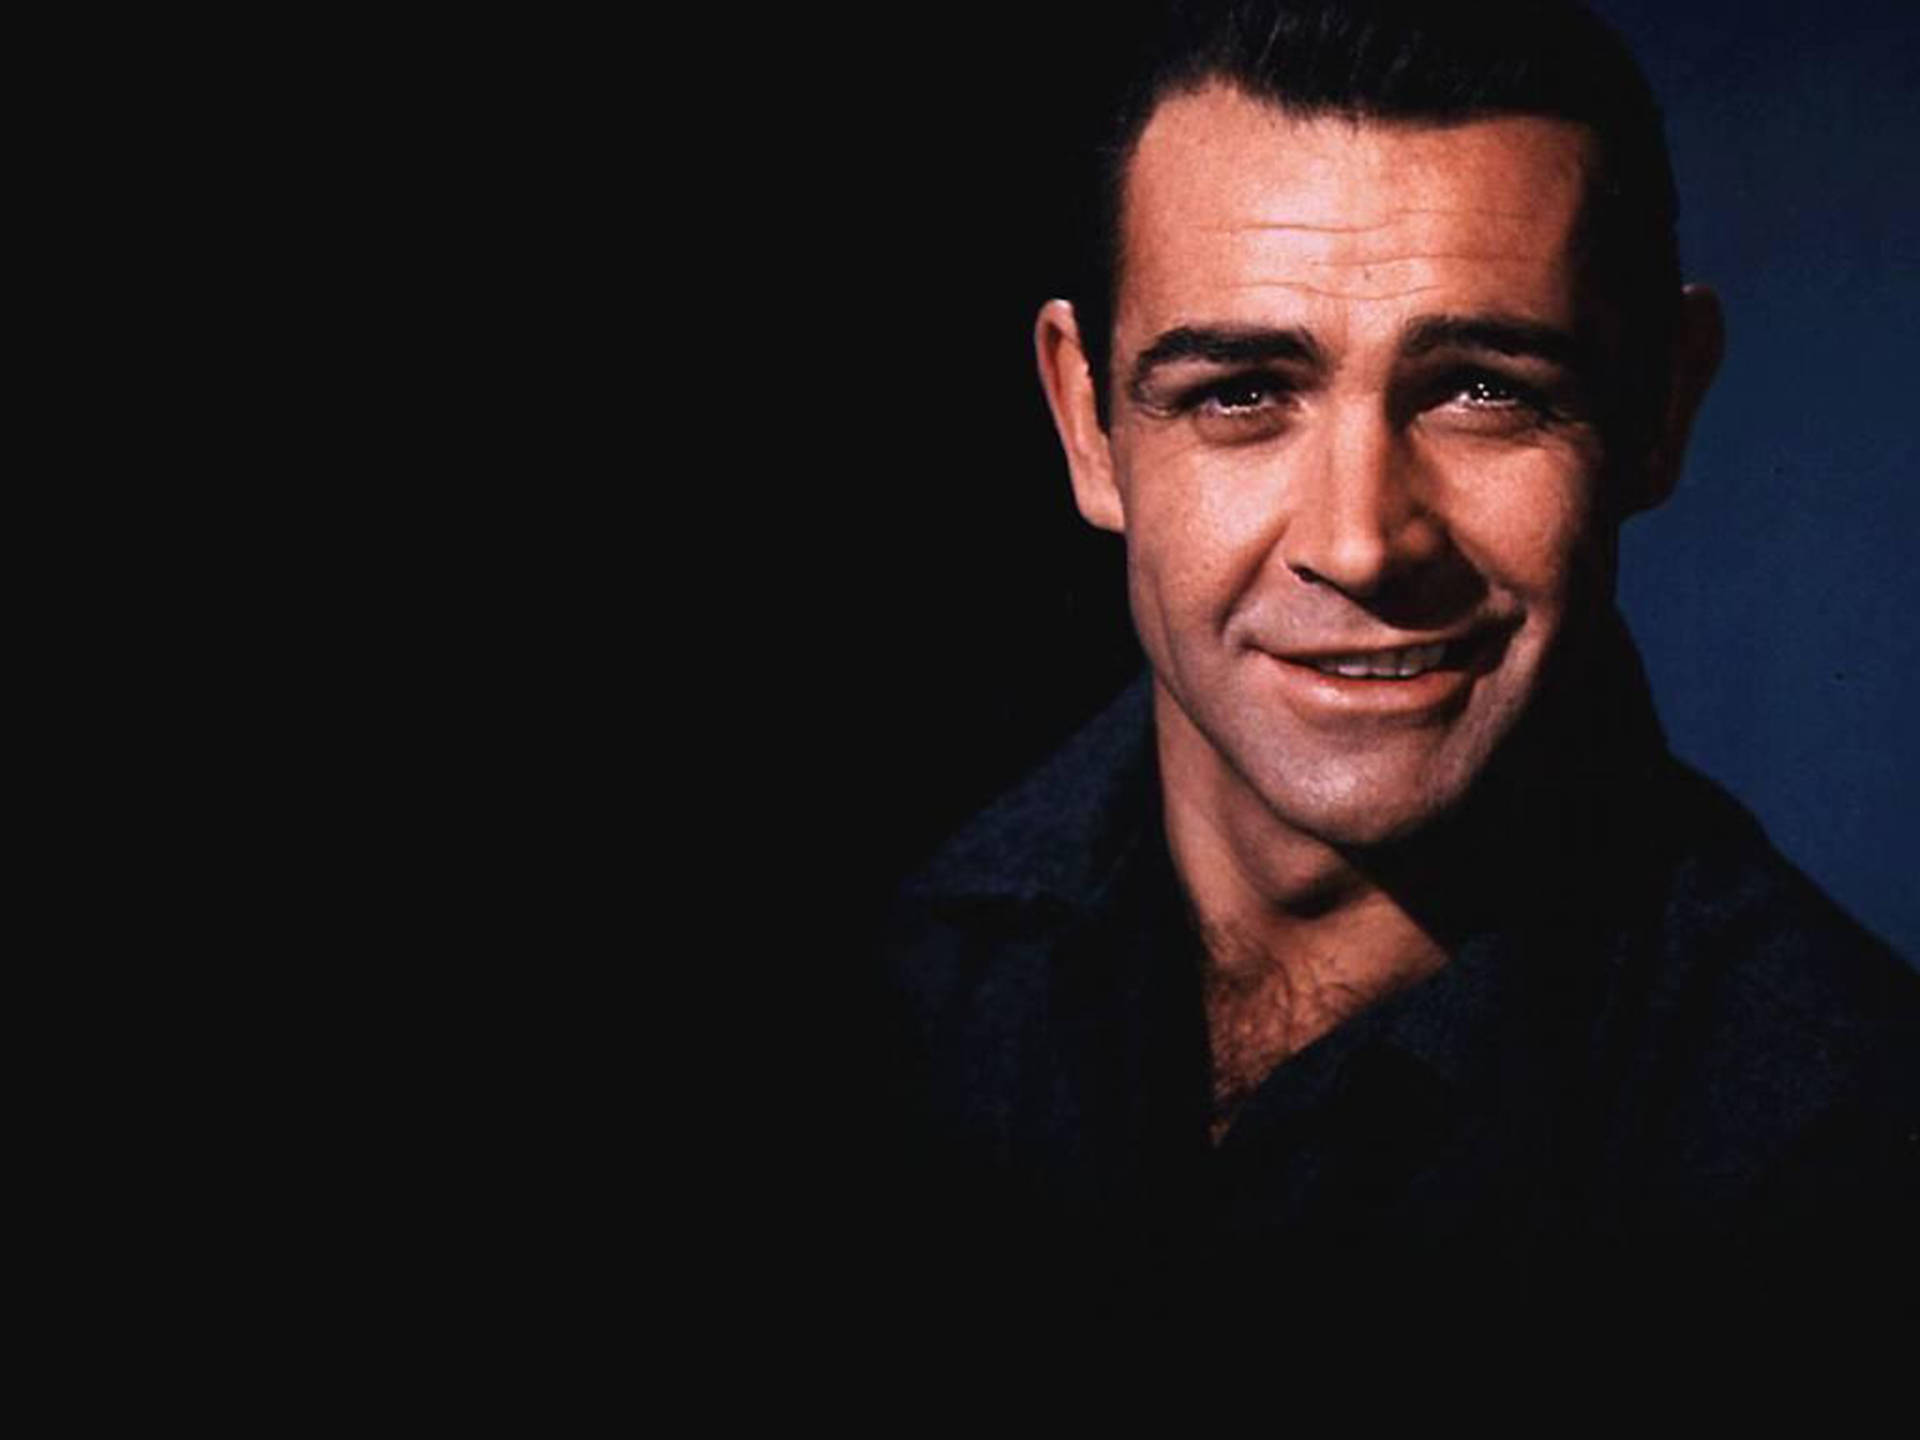 Charming Actor Sean Connery